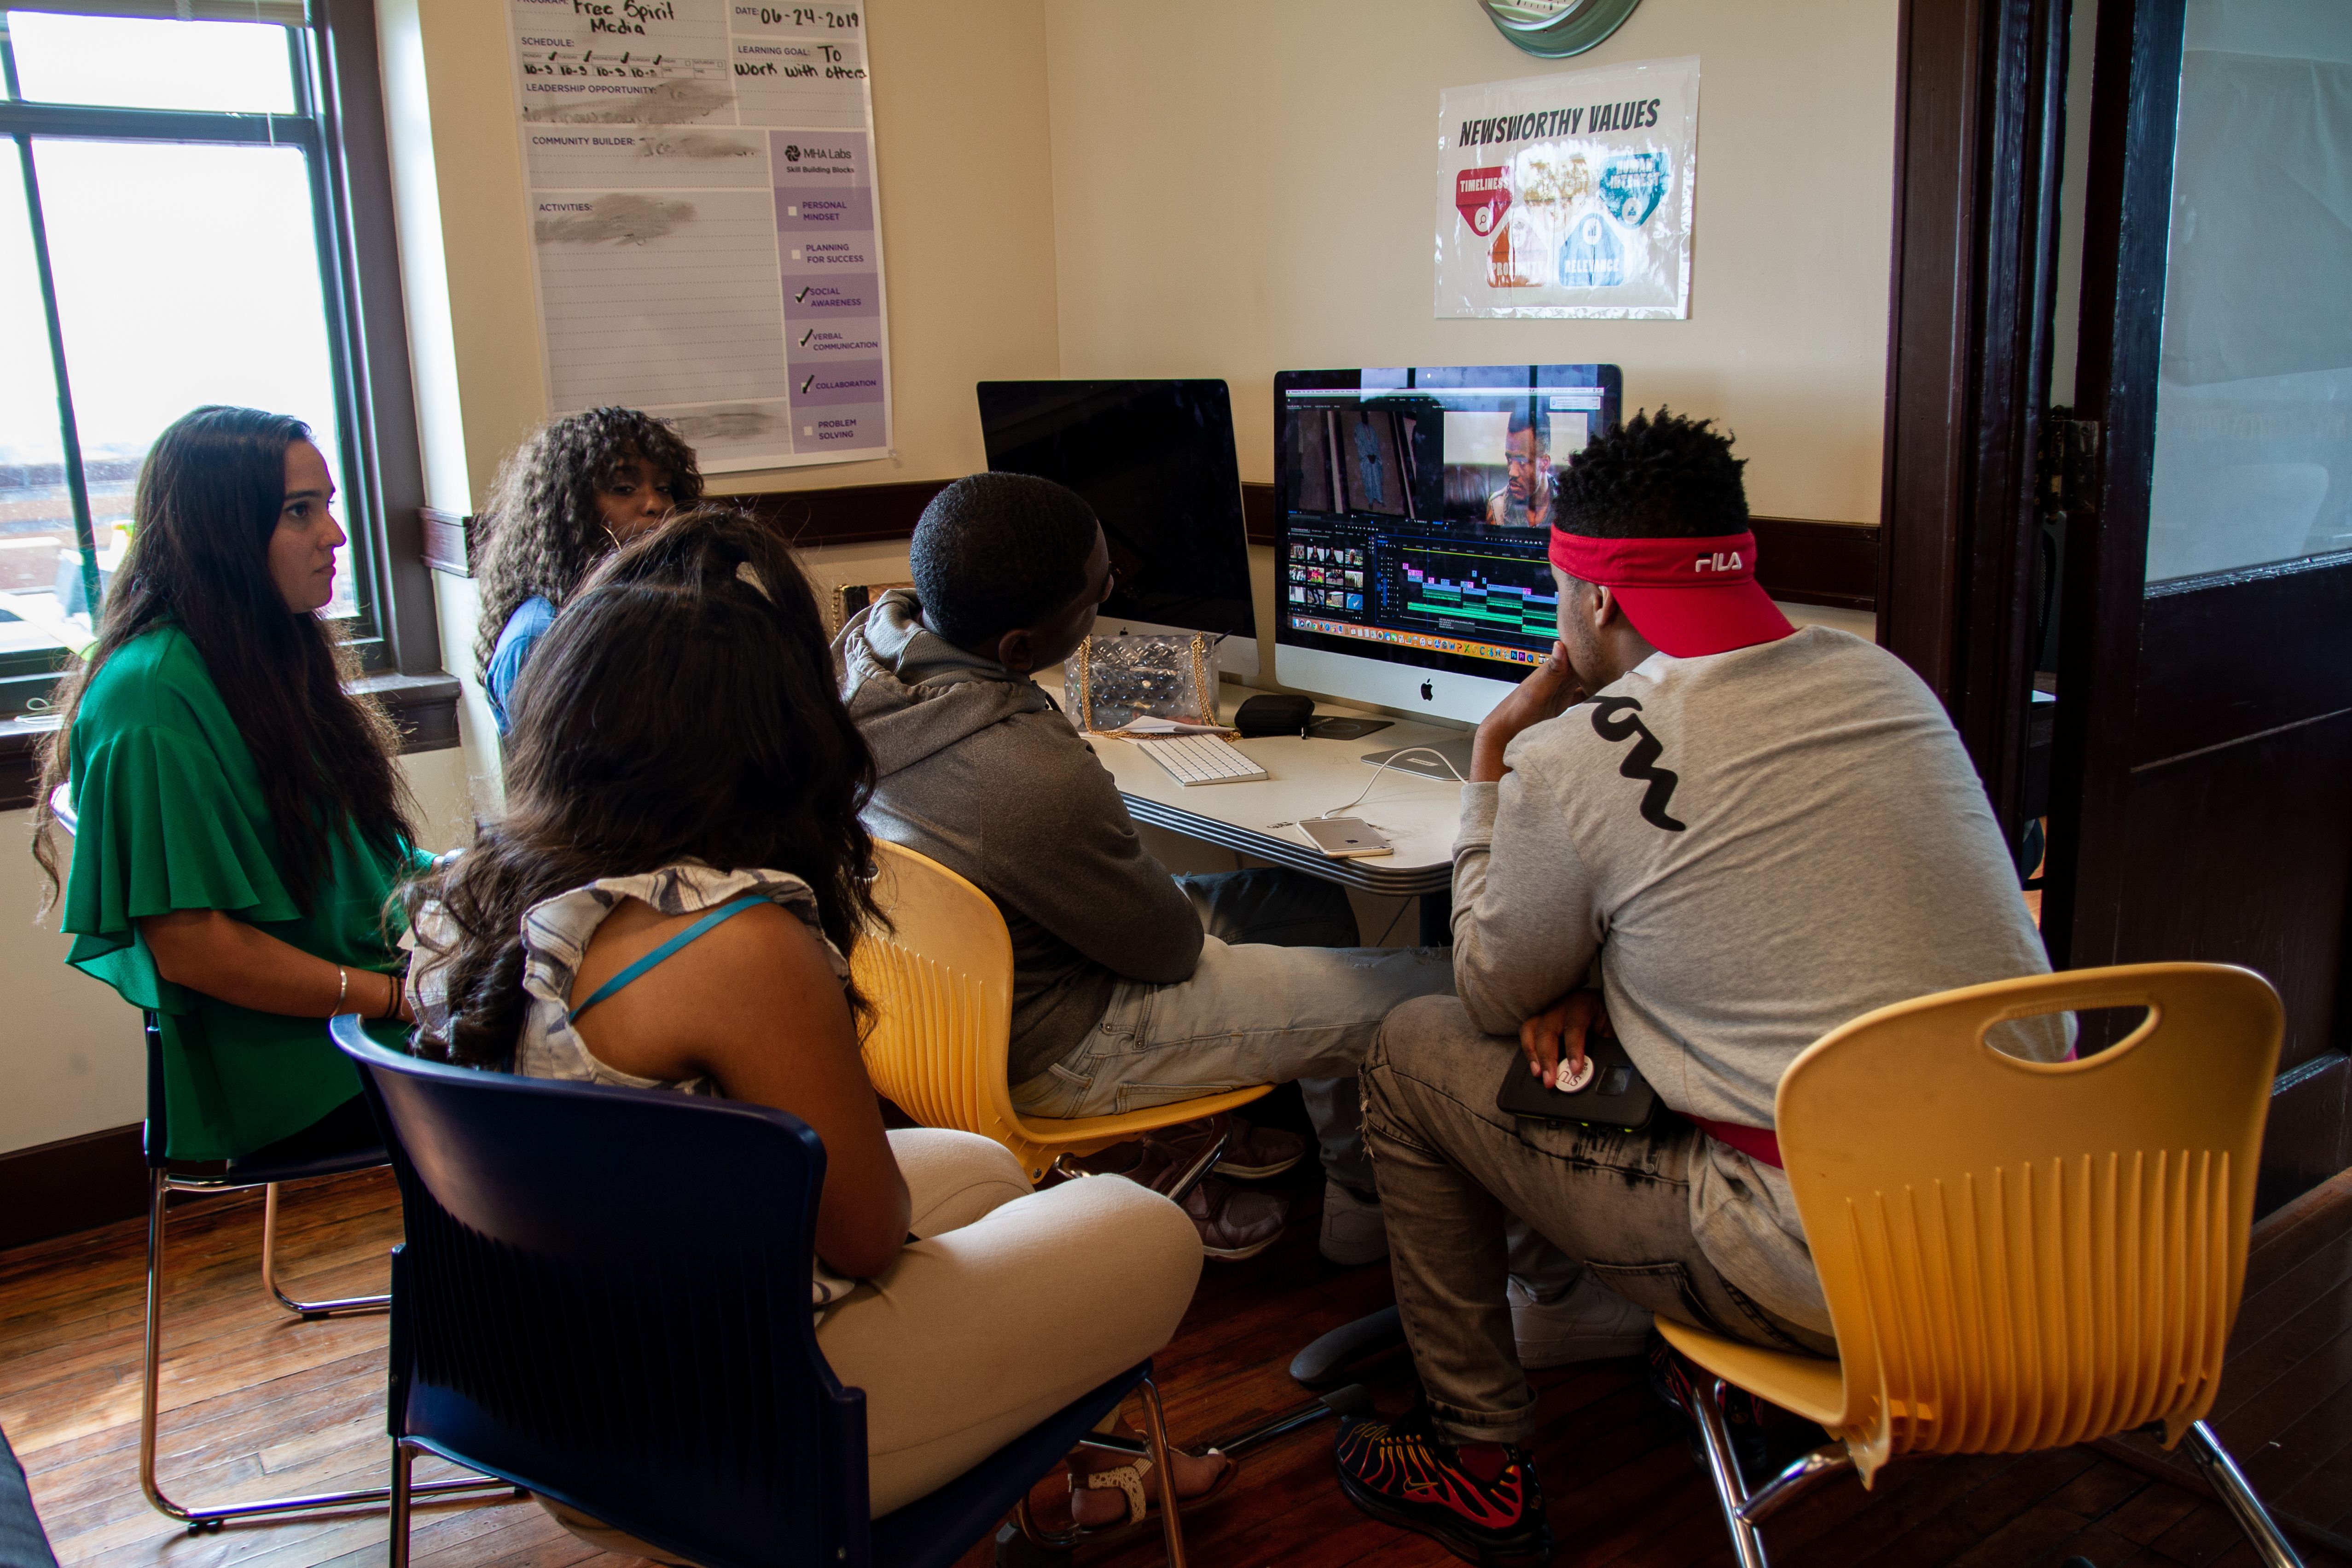 Students work with photojournalist Meghan Dhaliwal to edit Stuck in the System. Image by Claire Seaton. United States, 2019.